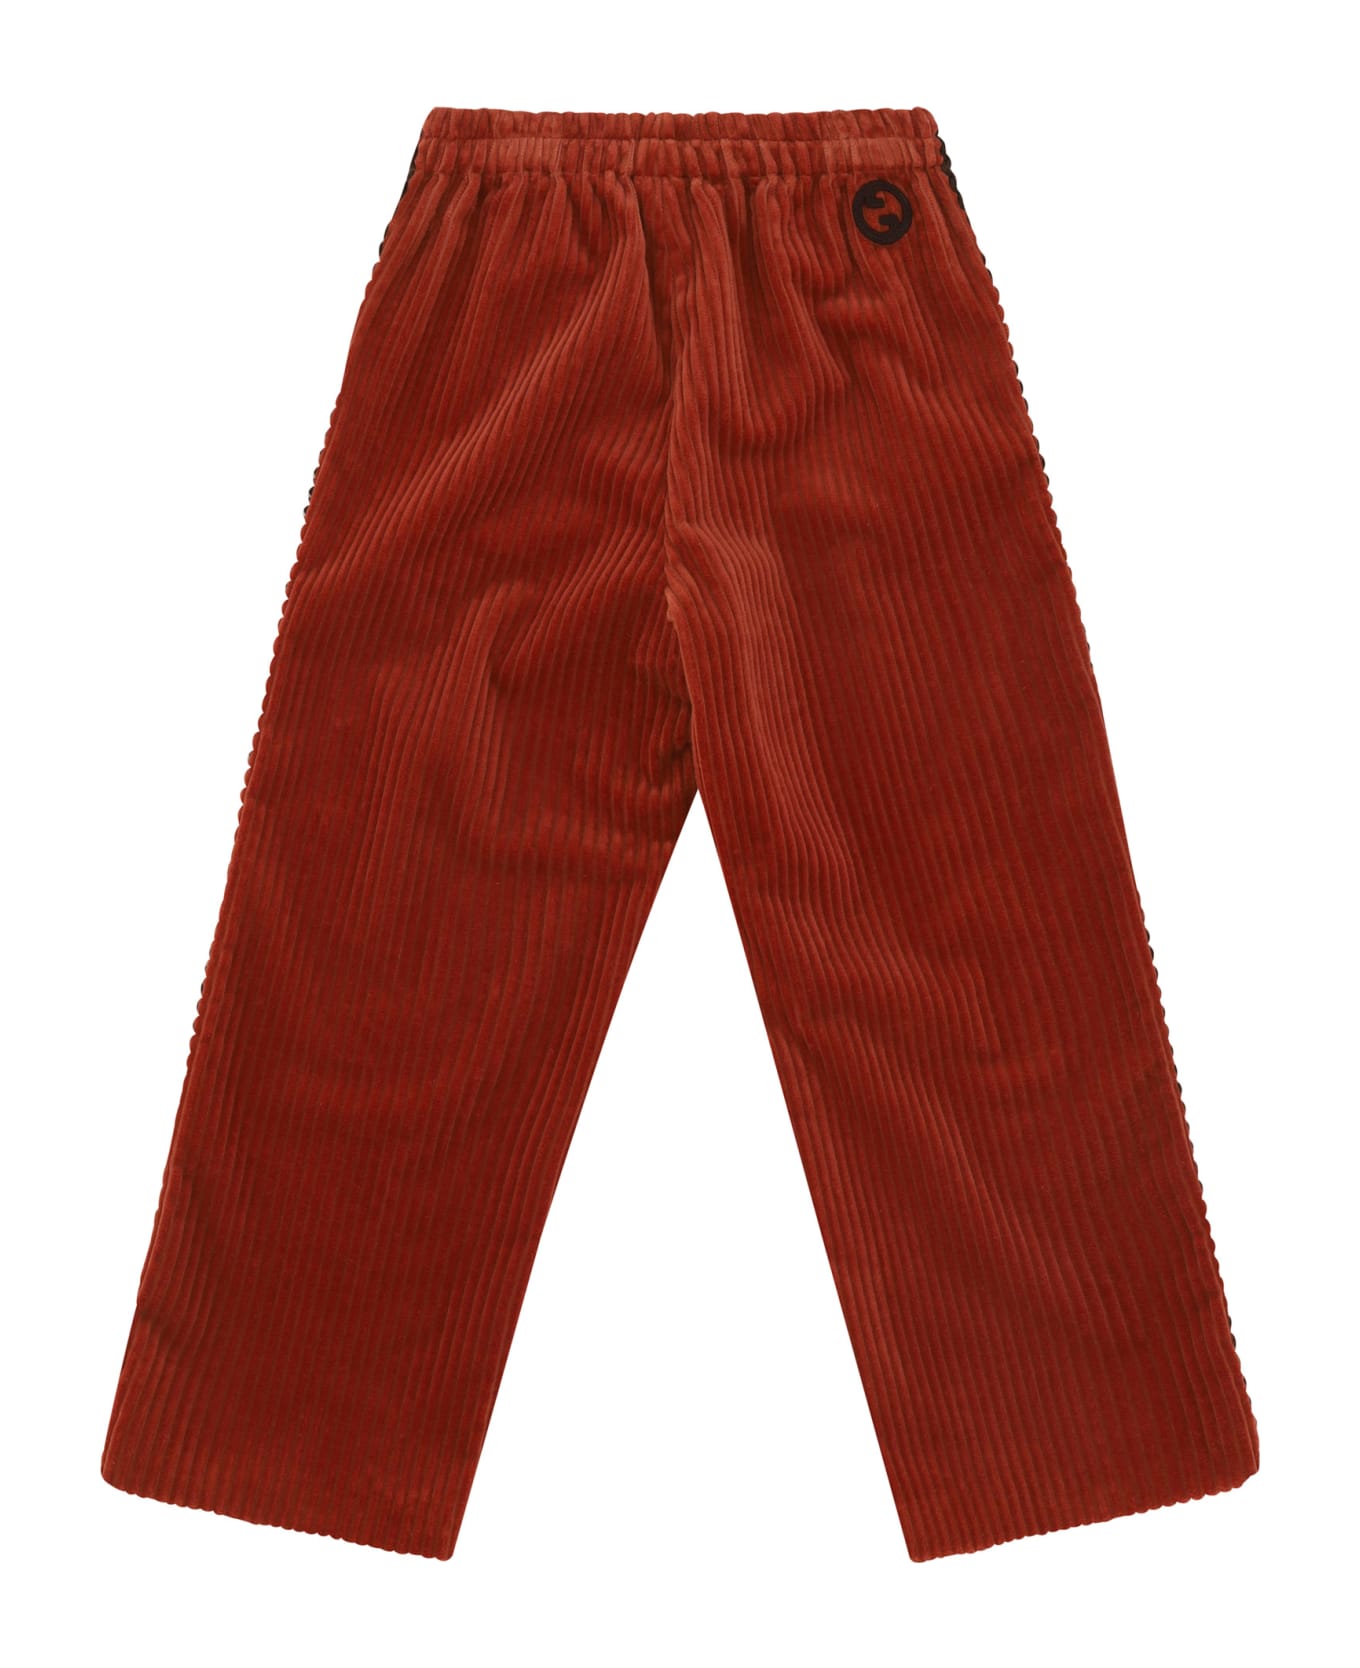 Gucci Pants For Boy - Old Copper/mix